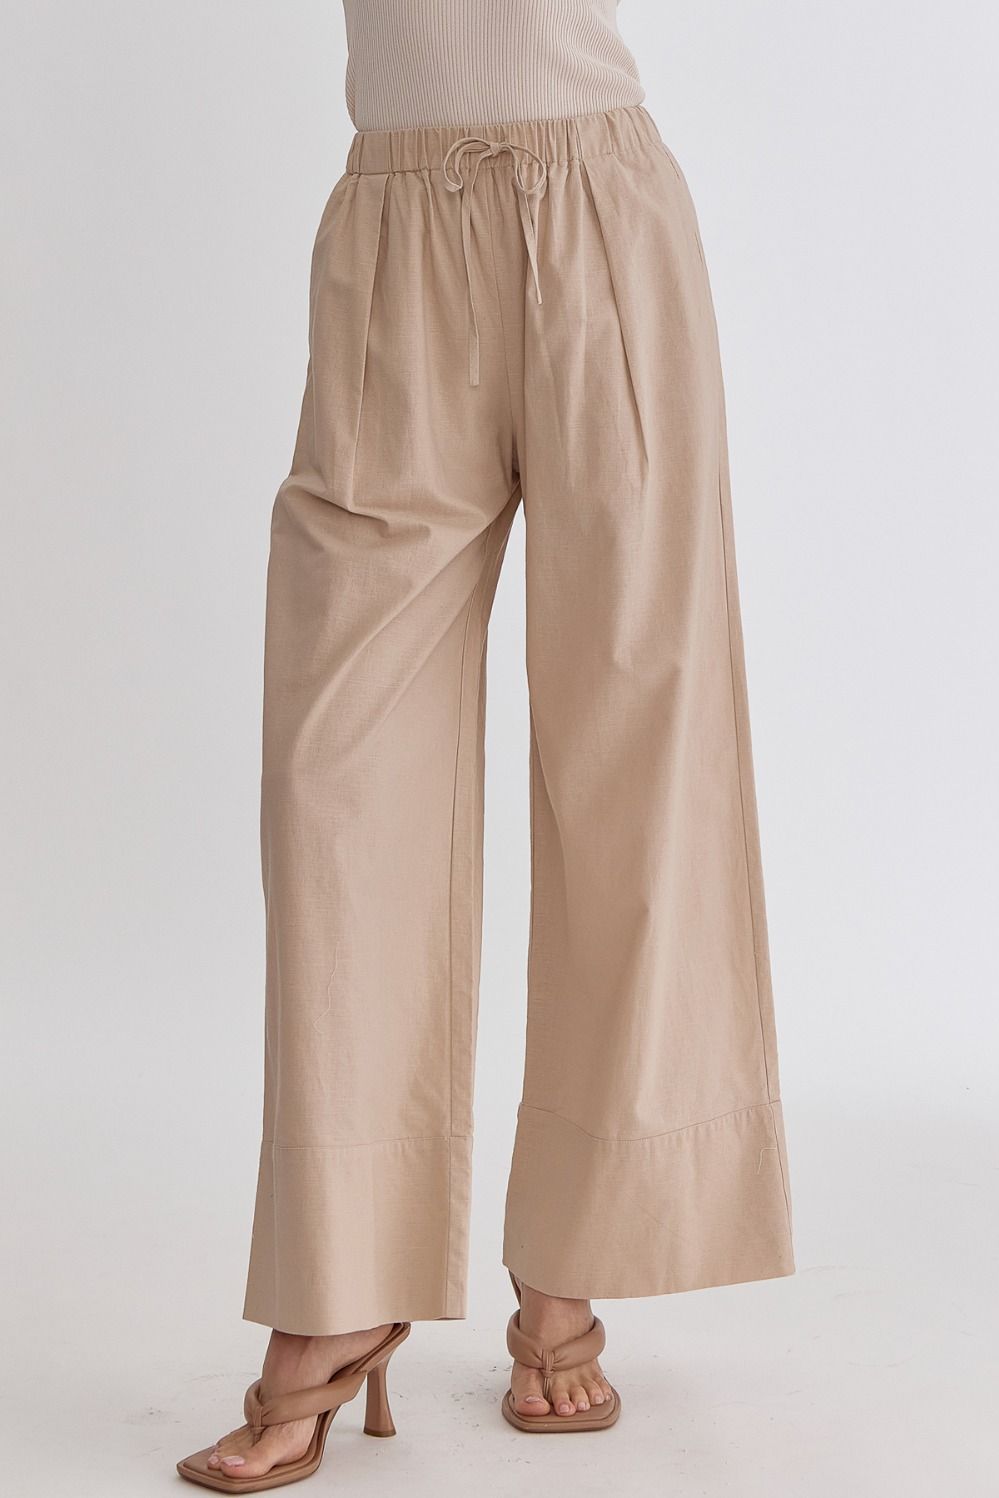 Classic Solid High Waisted Wide Leg Linen Drawstring Waist Pant - Taupe